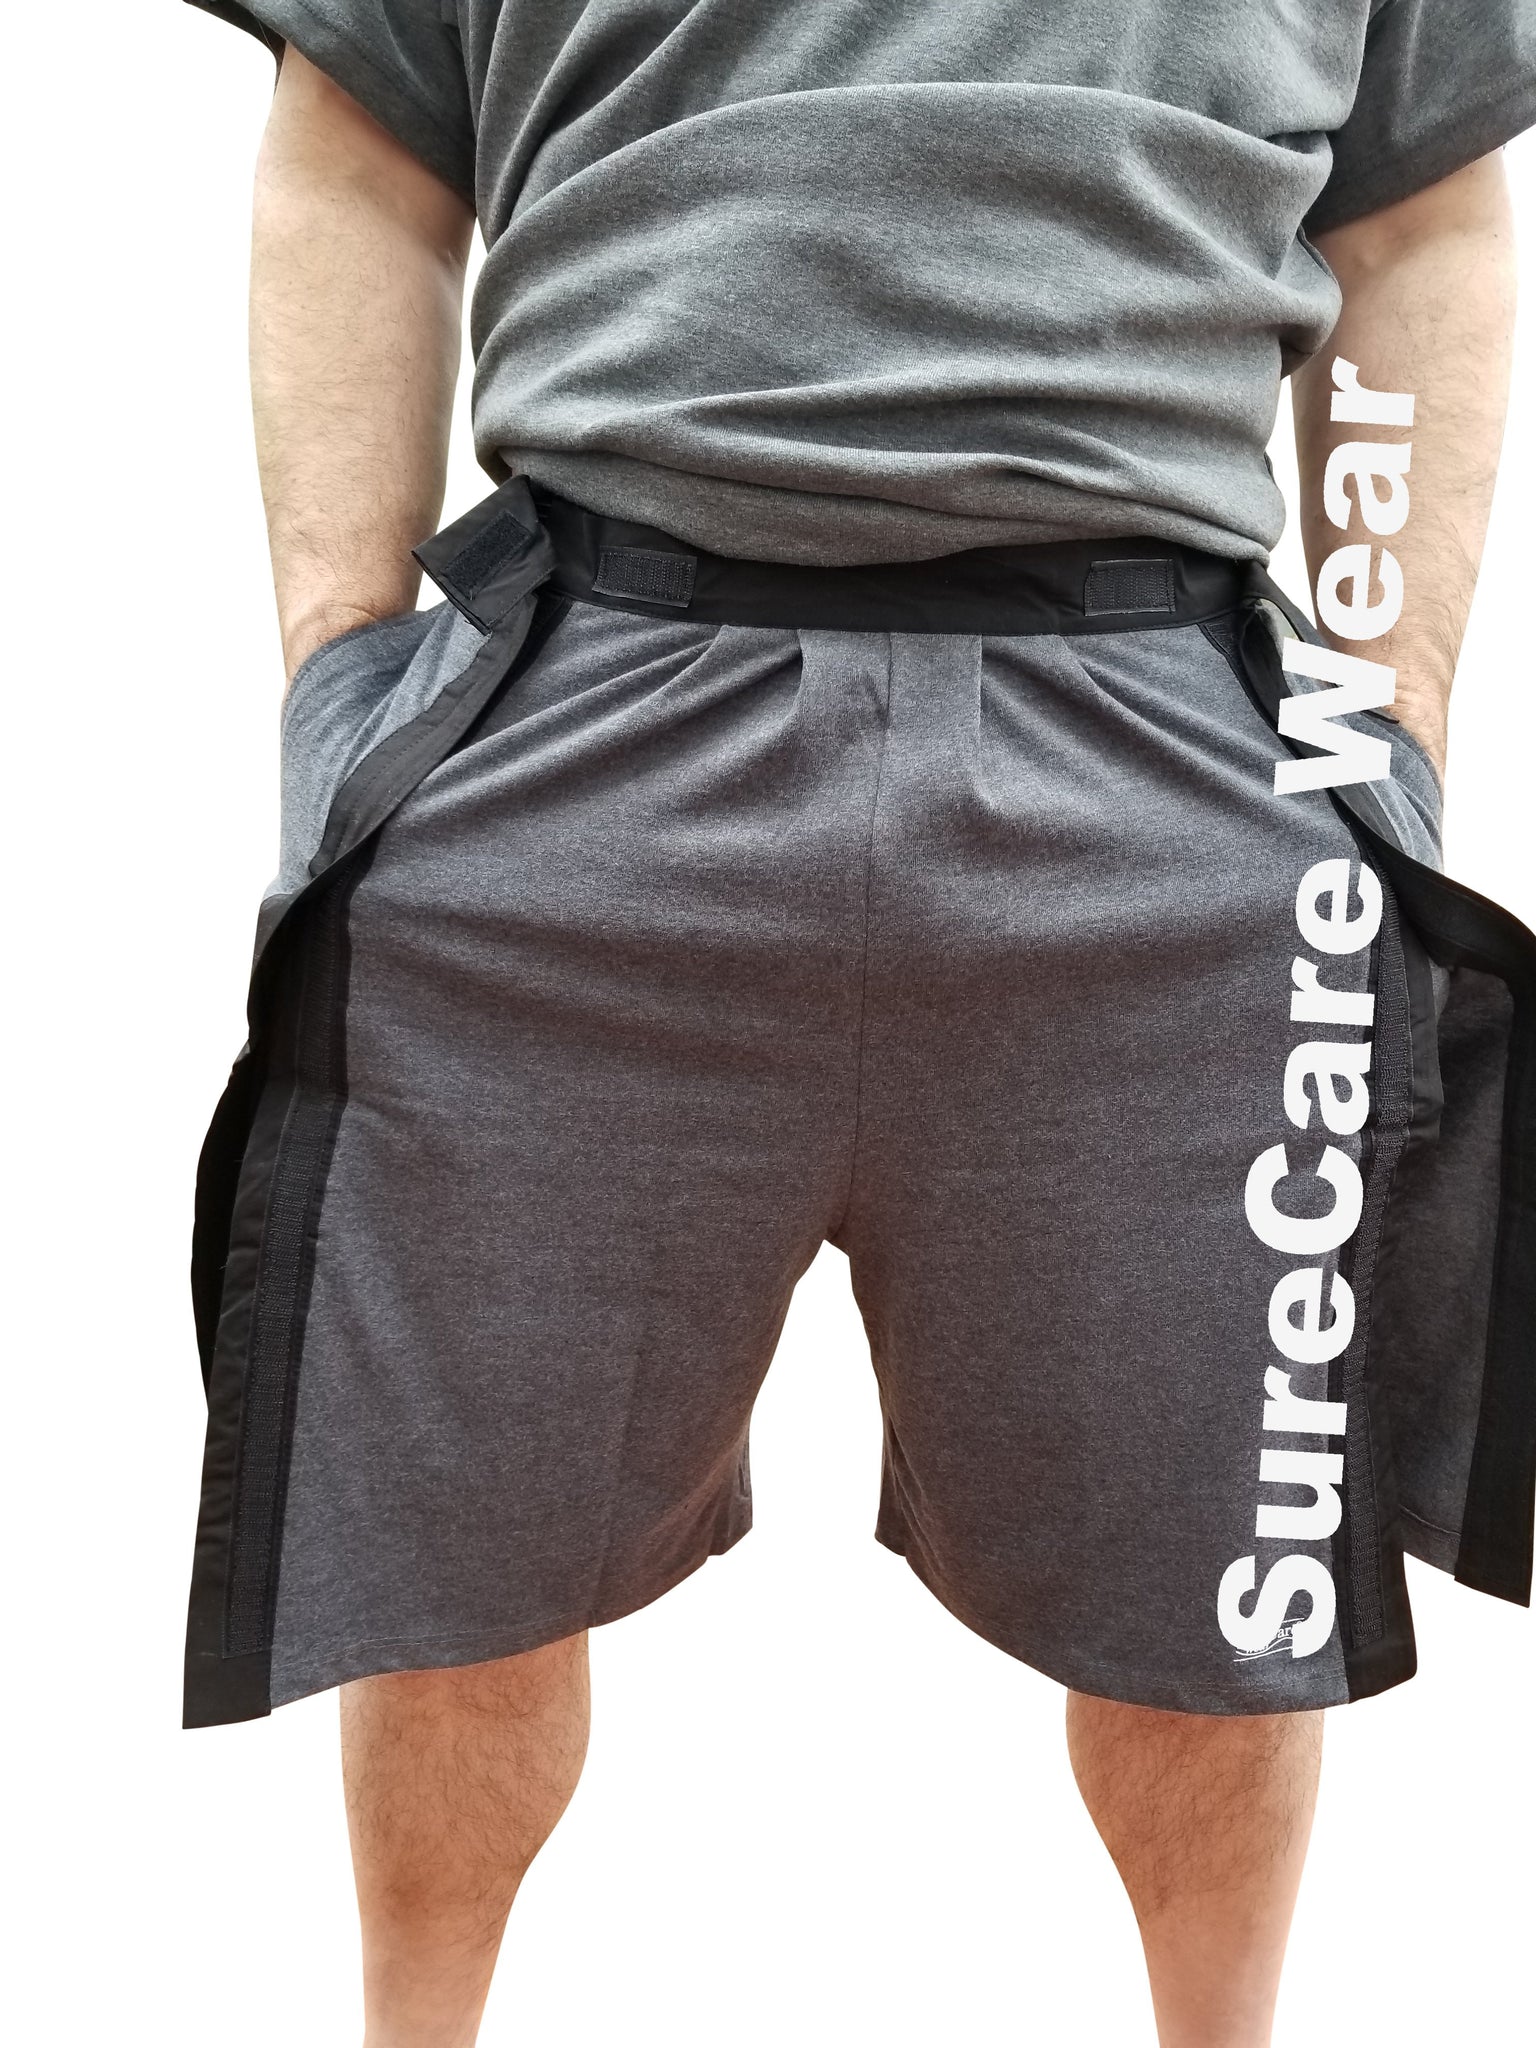 SureCare® Wear ~ NEW Hip / Knee Post Surgery Recovery Shorts with Velc –, BLOSSOM BREEZE, Online Shopping for Blossom Breeze for Comfort Collection, and